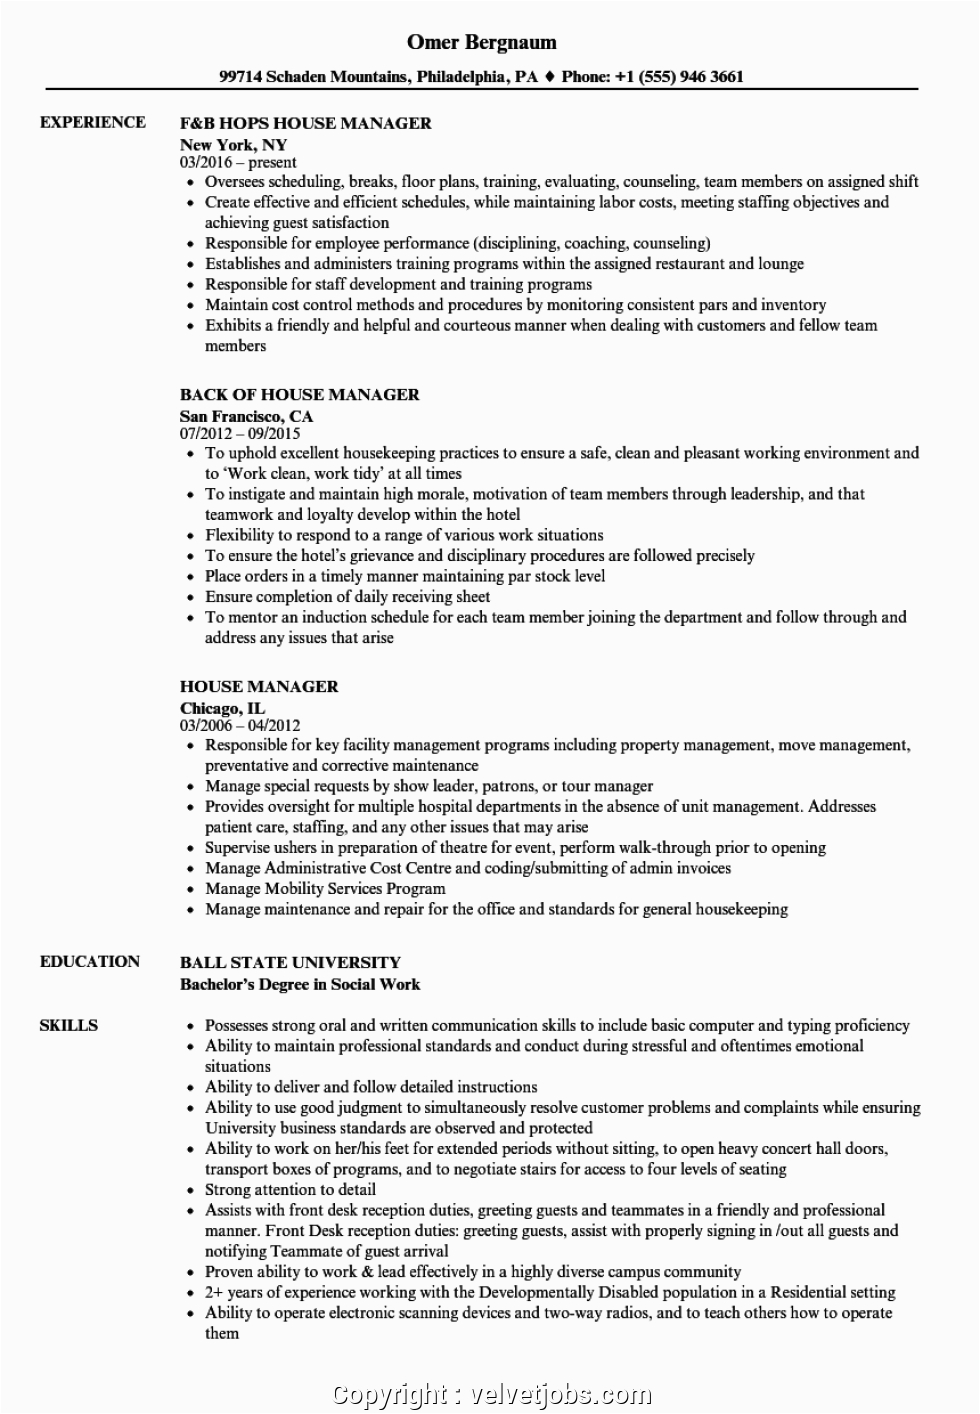 Residential Group Home Manager Sample Resume Make House Manager Resume House Manager Resume Samples